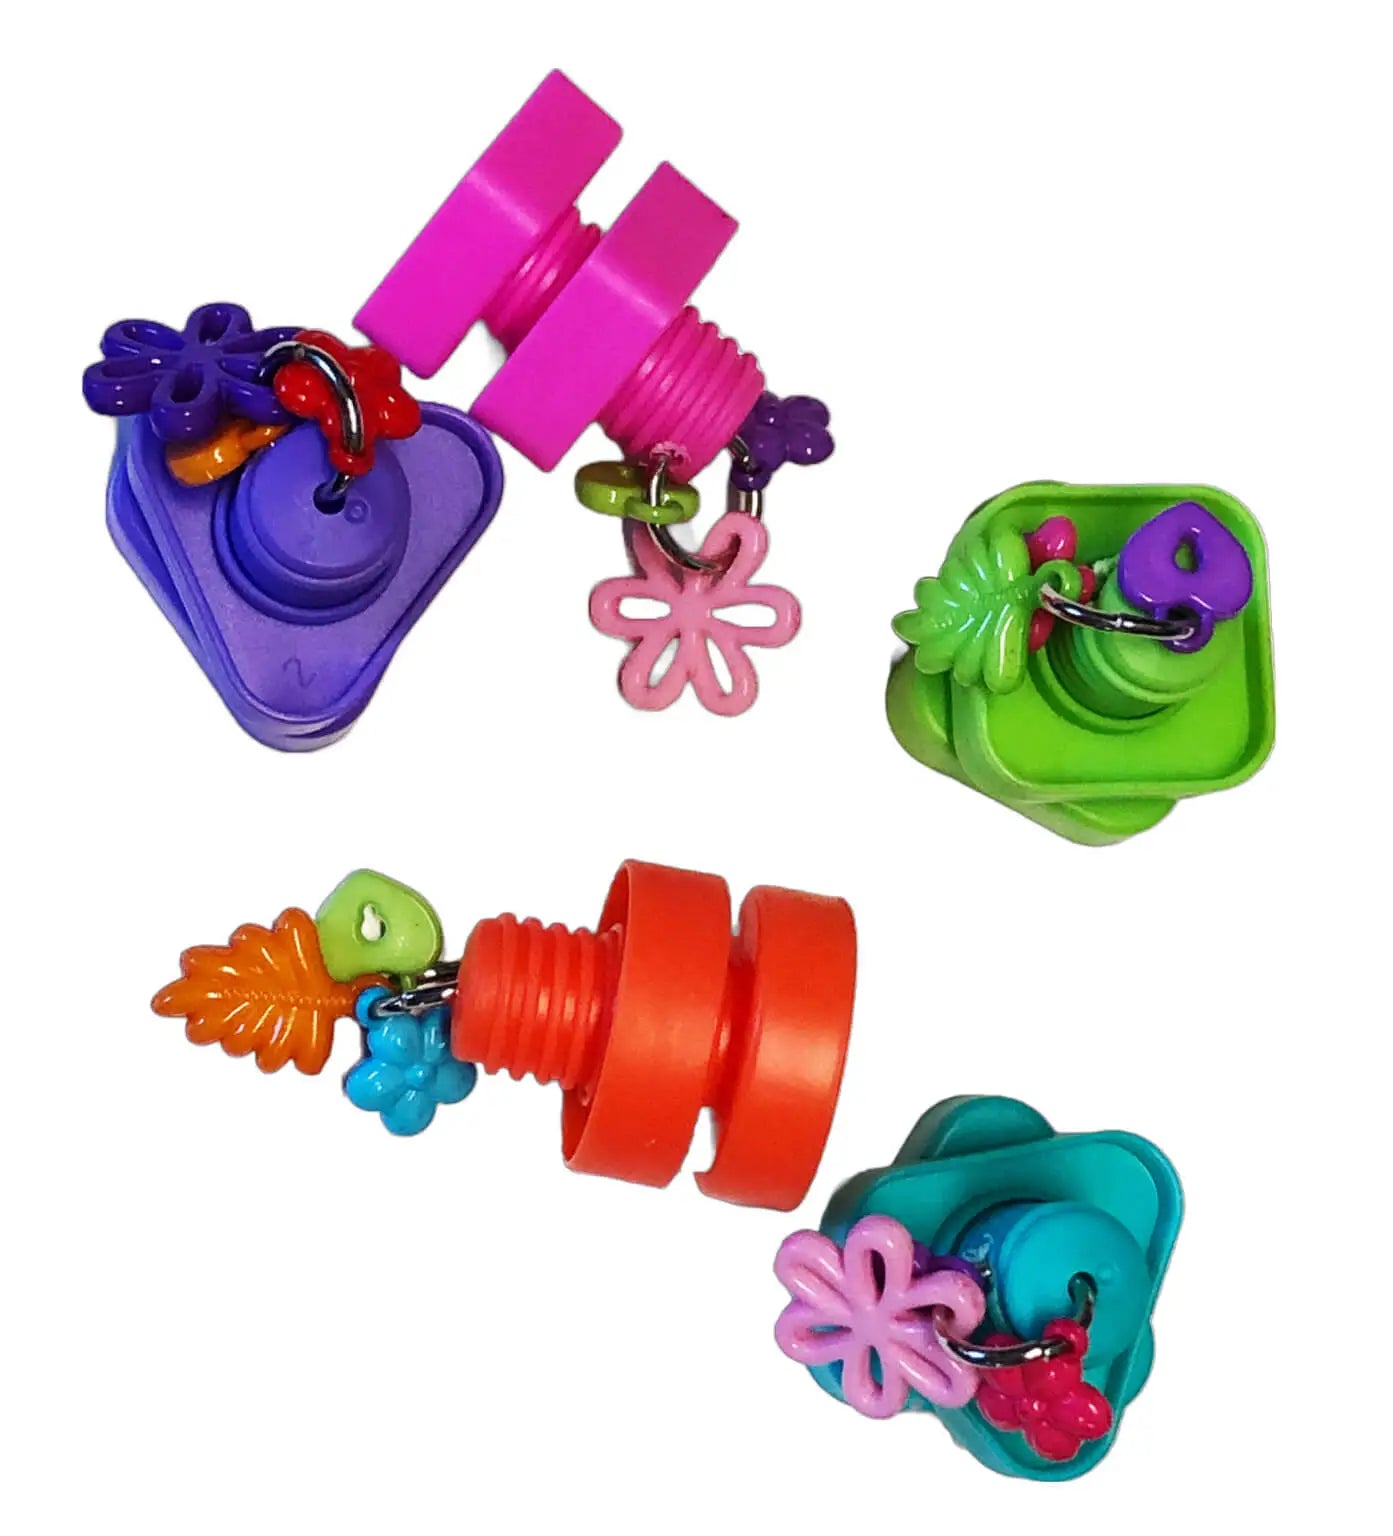 nut and bolt parrot foot toys in different colors 